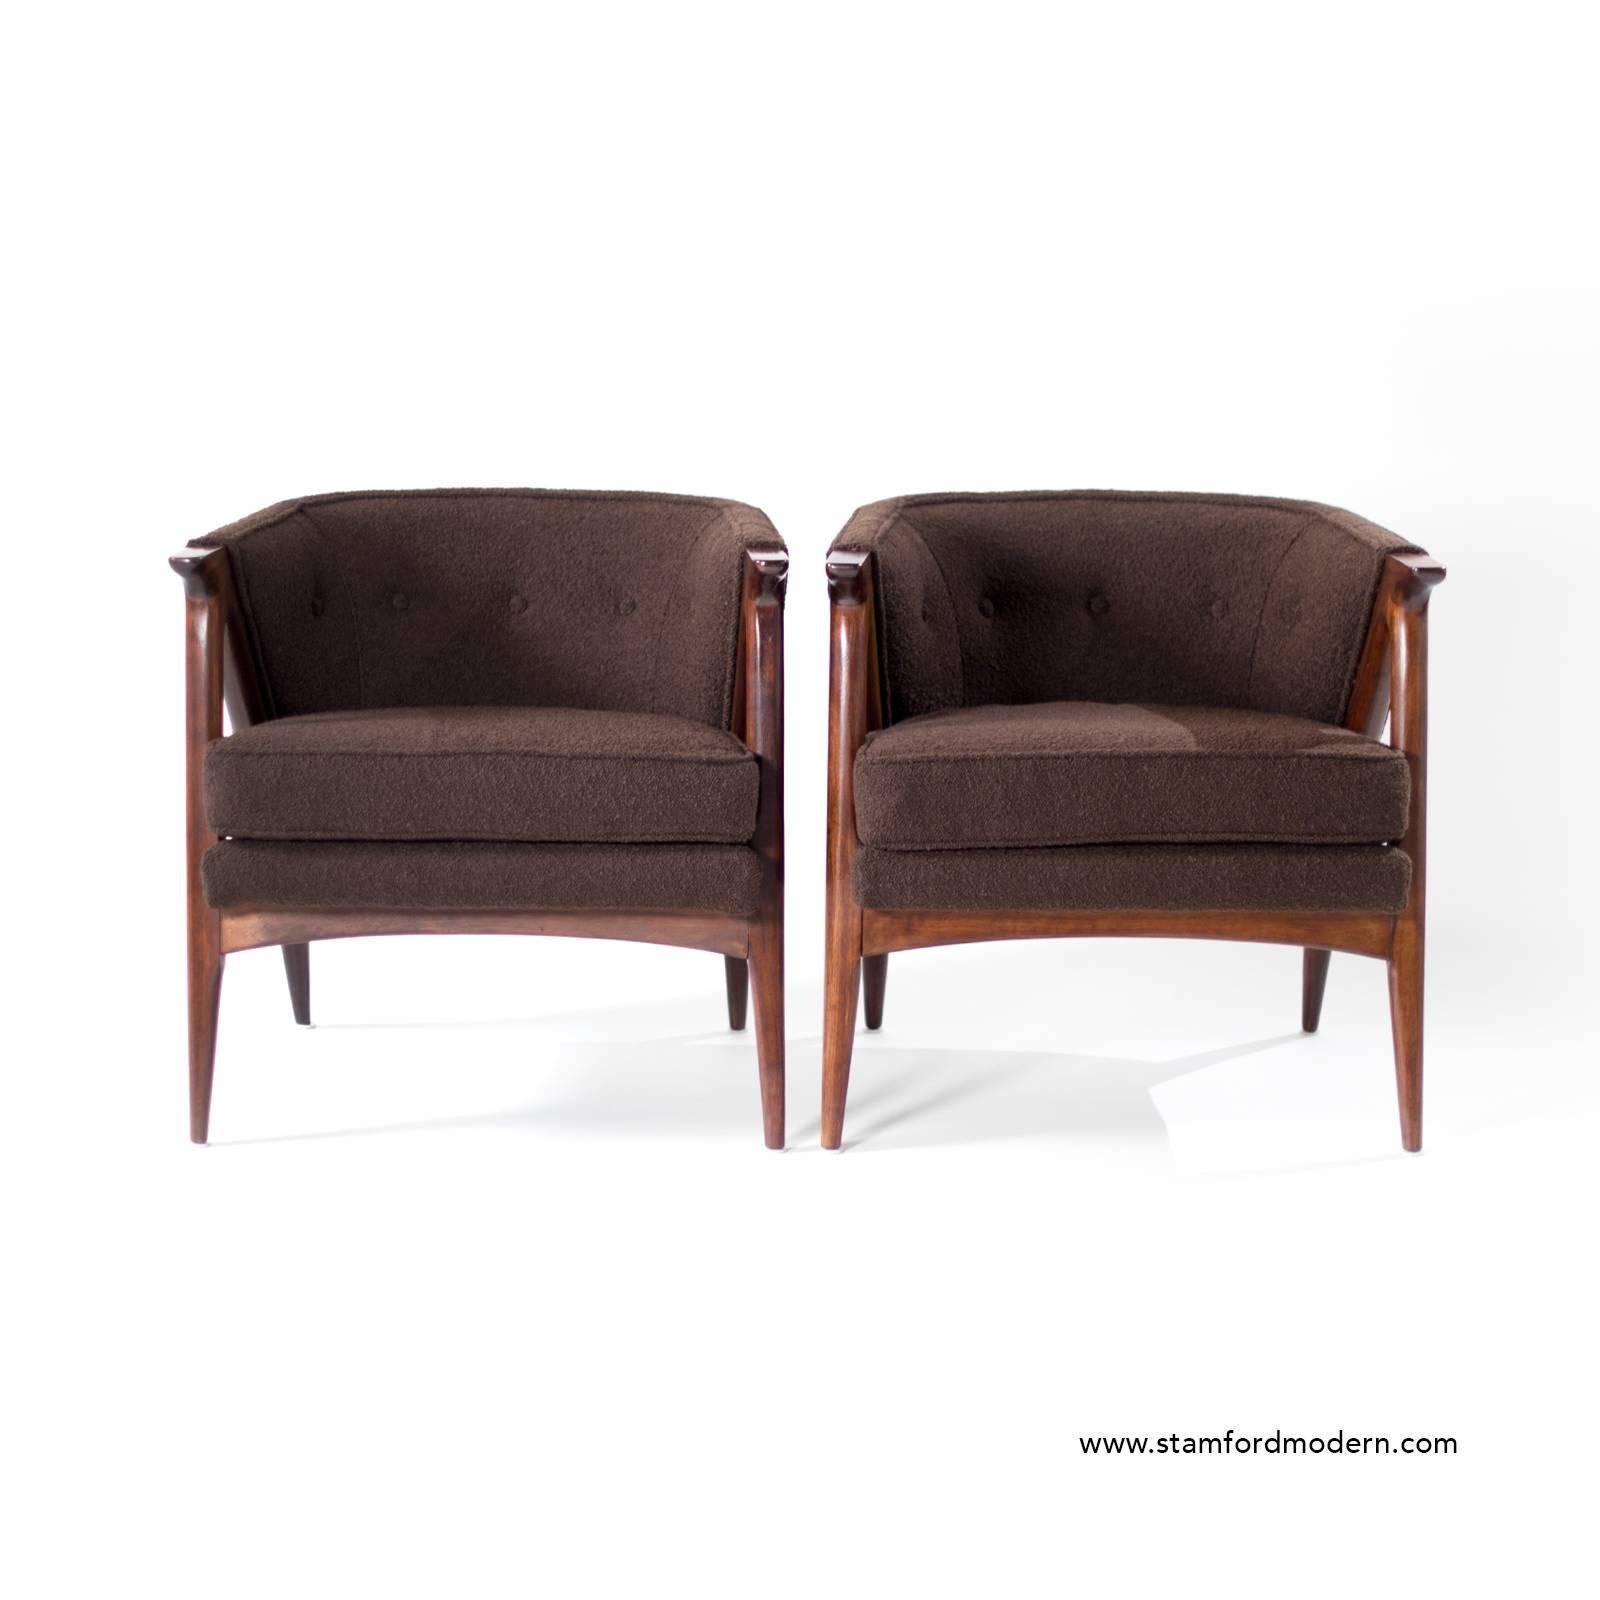 Pair of fully restored Danish modern lounge chairs, circa 1950s. Sculptural walnut frames fully restored, newly upholstered in brown boucle.